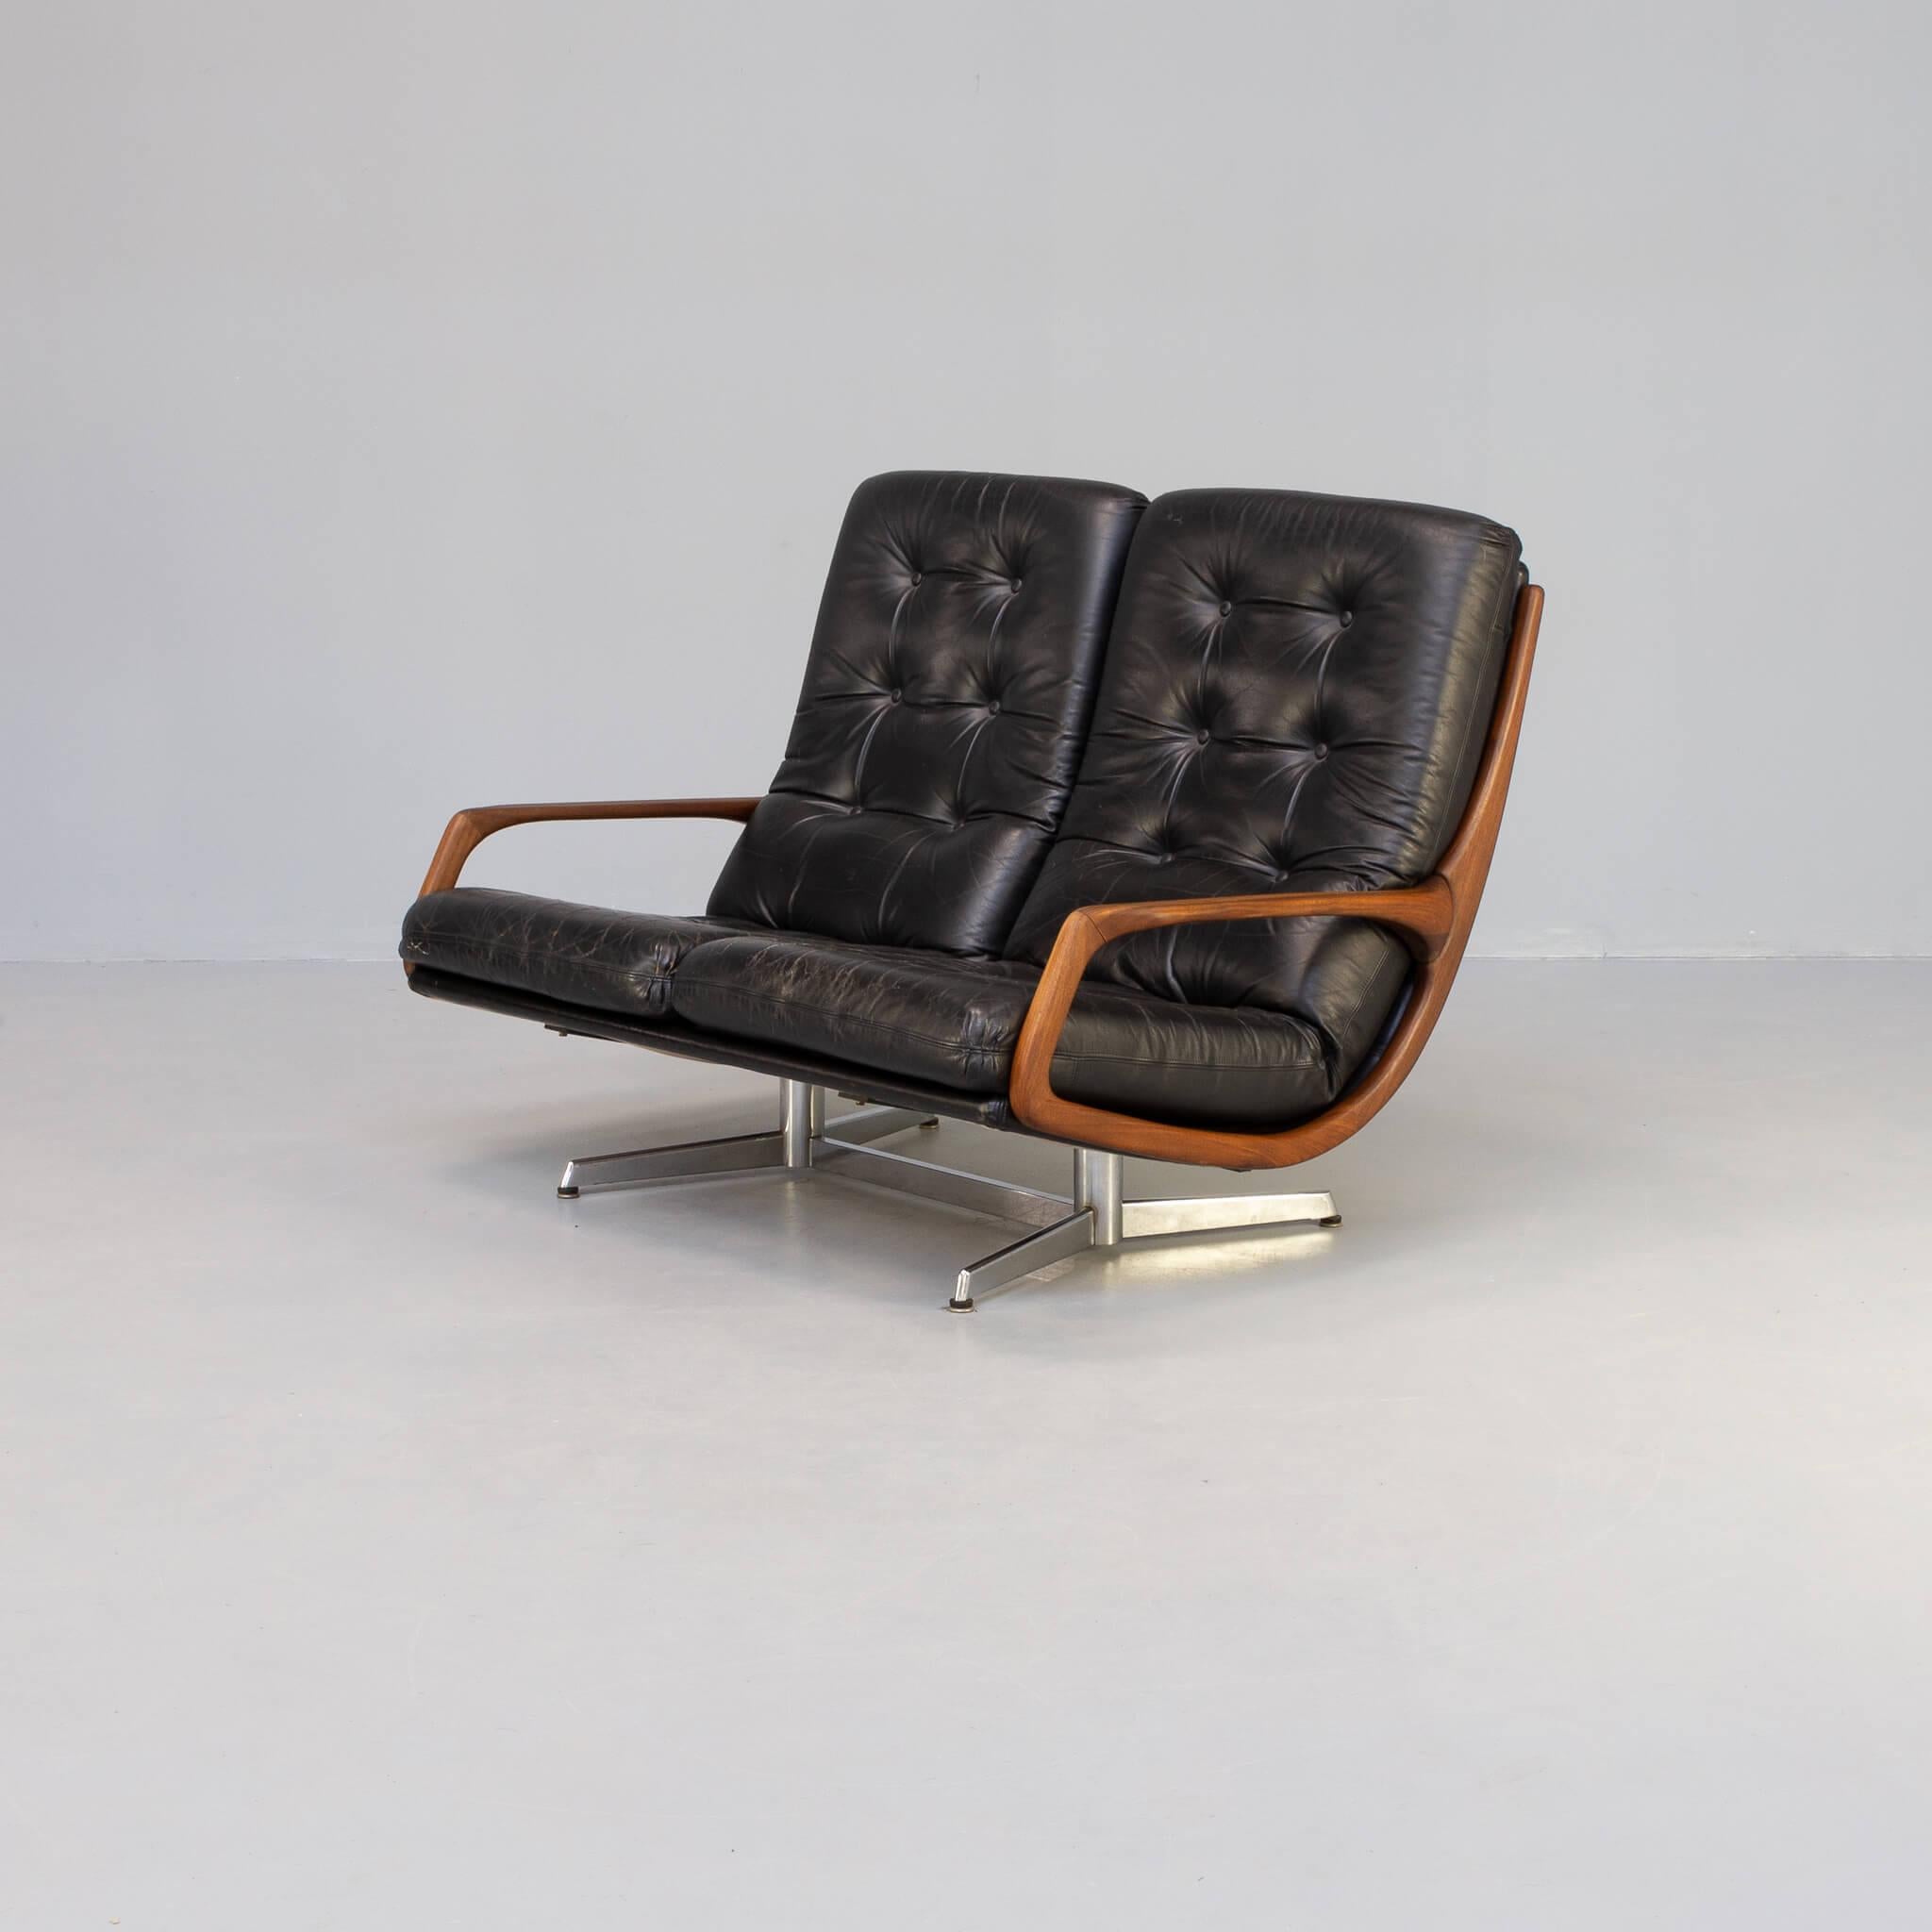 The midcentury design trend initiated by Danish designers in the 1950s to 1970s was followed in Germany by Eugen Schmidt in those years and brought to the market in the well-known German quality. Soloform was the manufacturer that produced these top